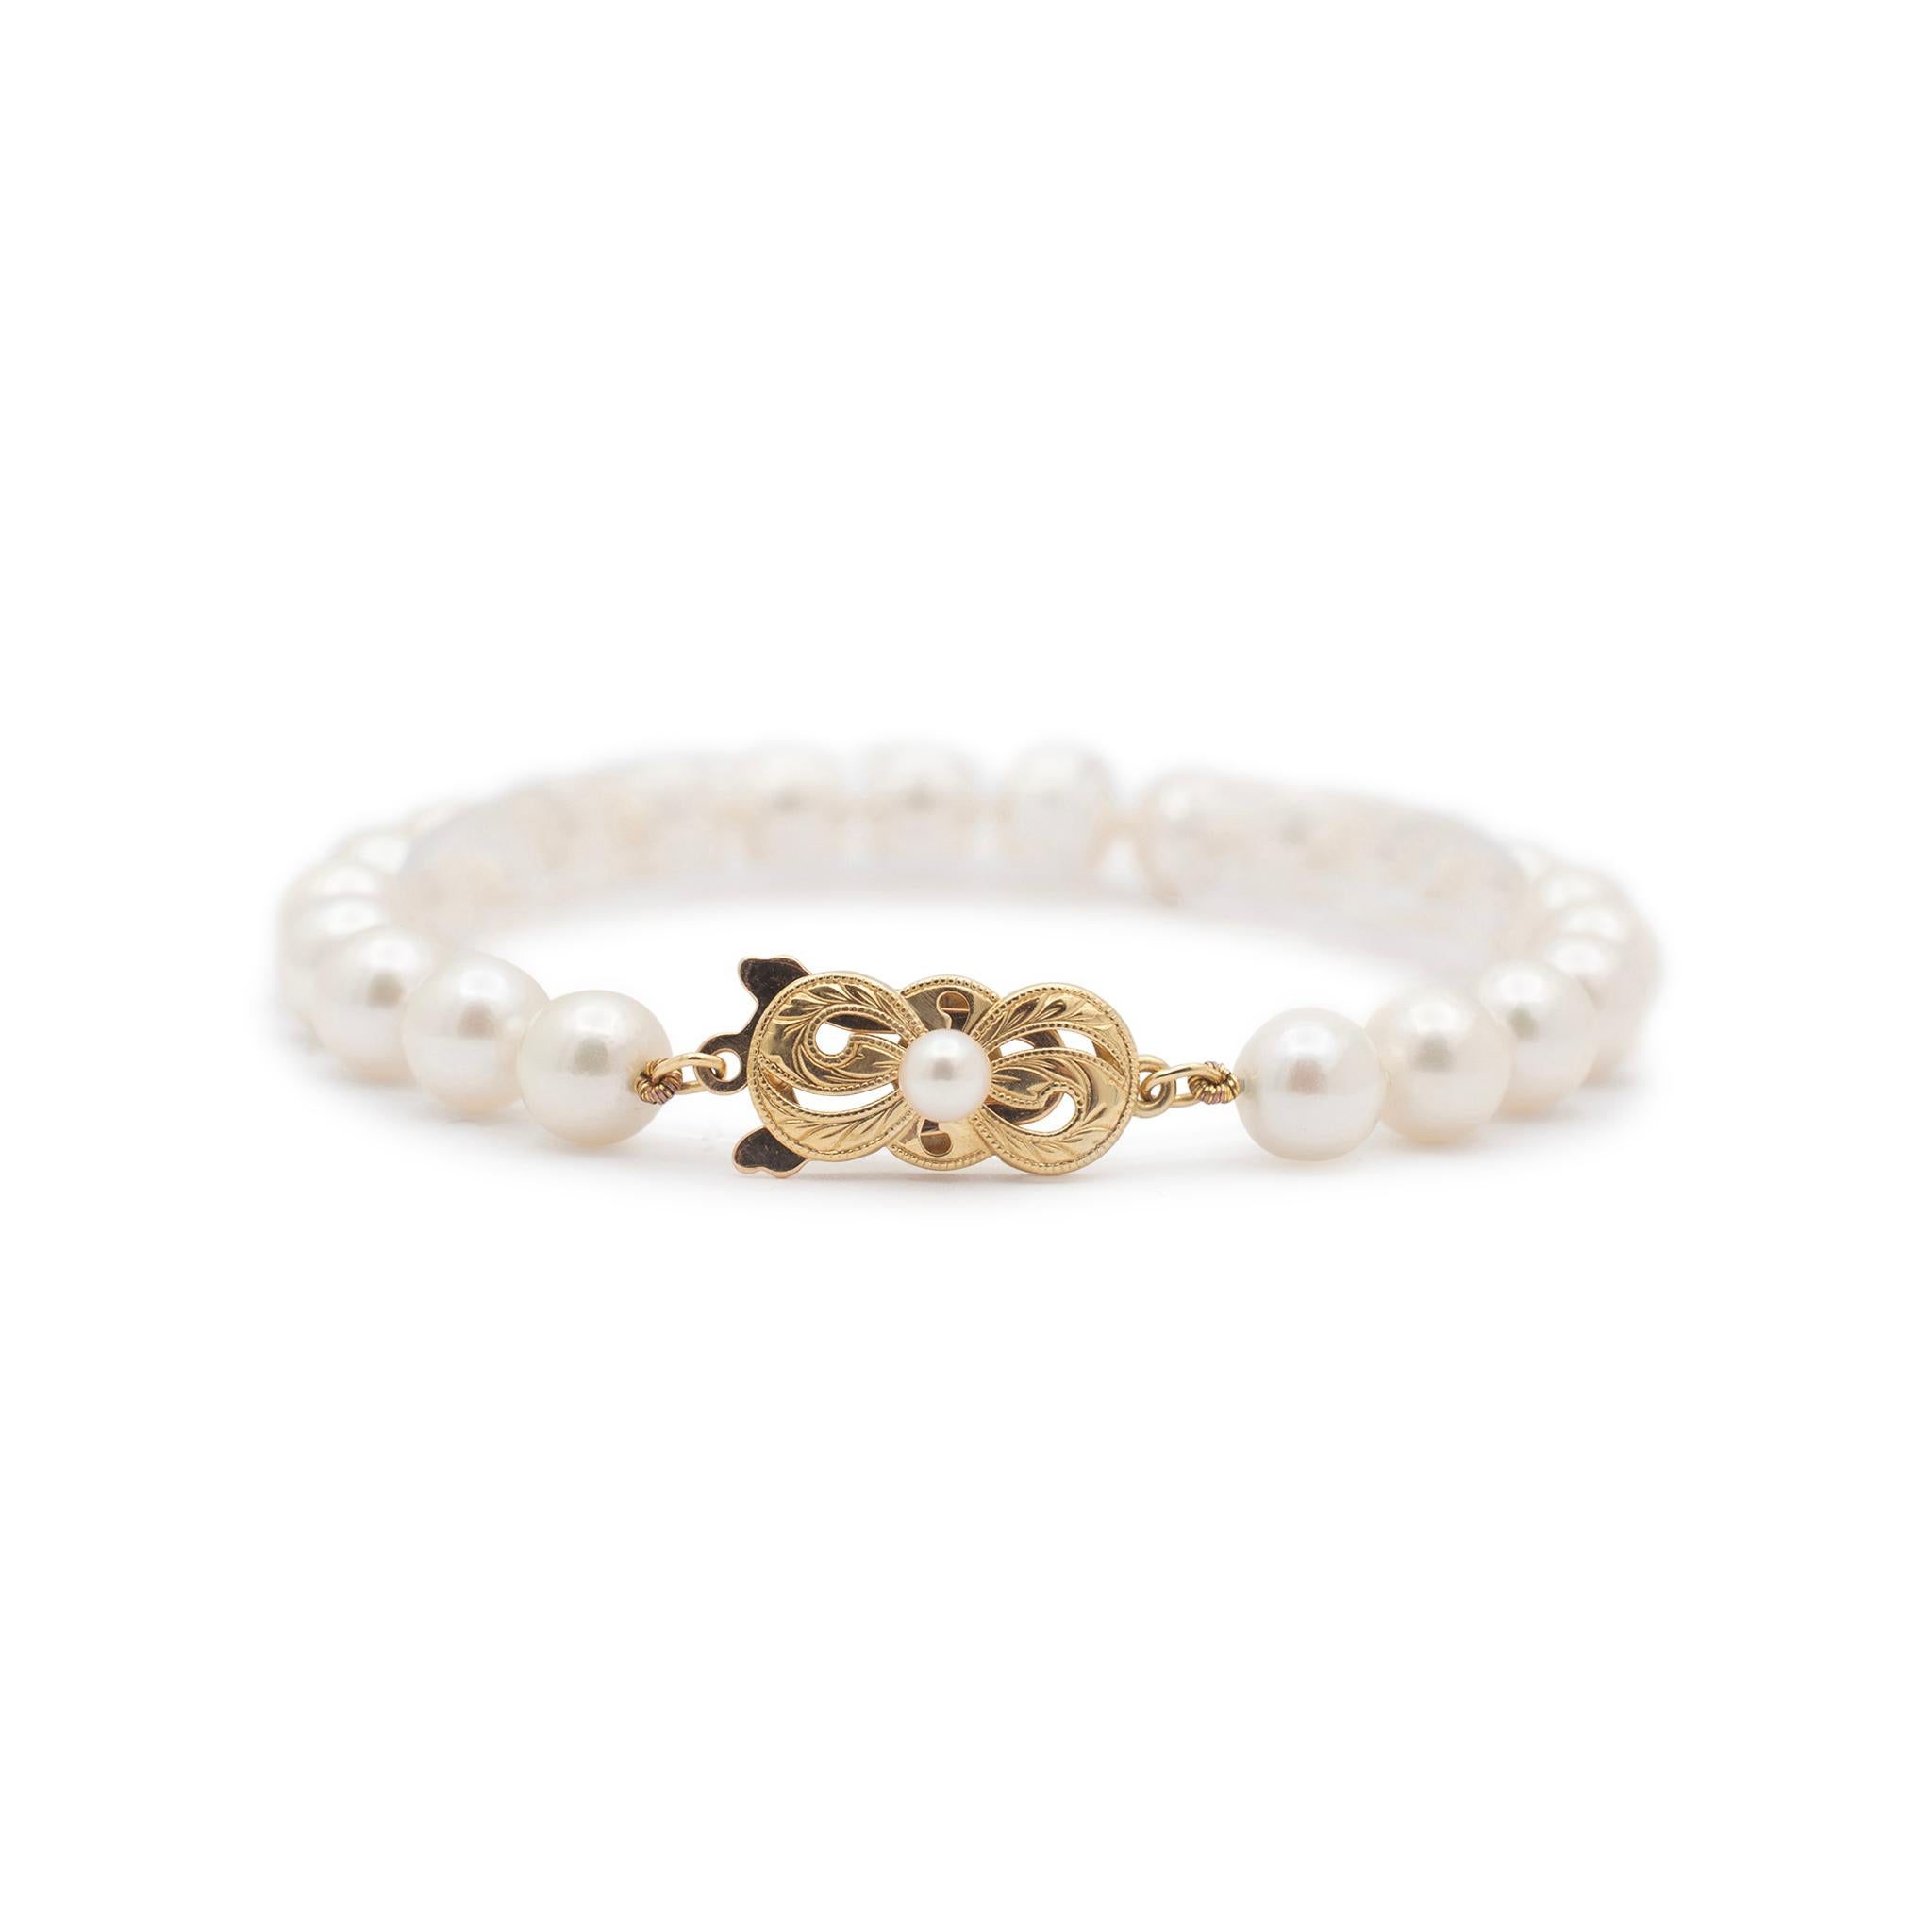 Brand: Mikimoto

Gender: Ladies

Metal Type: Yellow Gold

Length: 6.50 inches

Weight: 11.91 grams

One lady's knotted single-strand uniform pearl bracelet. The clasp metal was tested and determined to be 18K yellow gold. Engraved with 